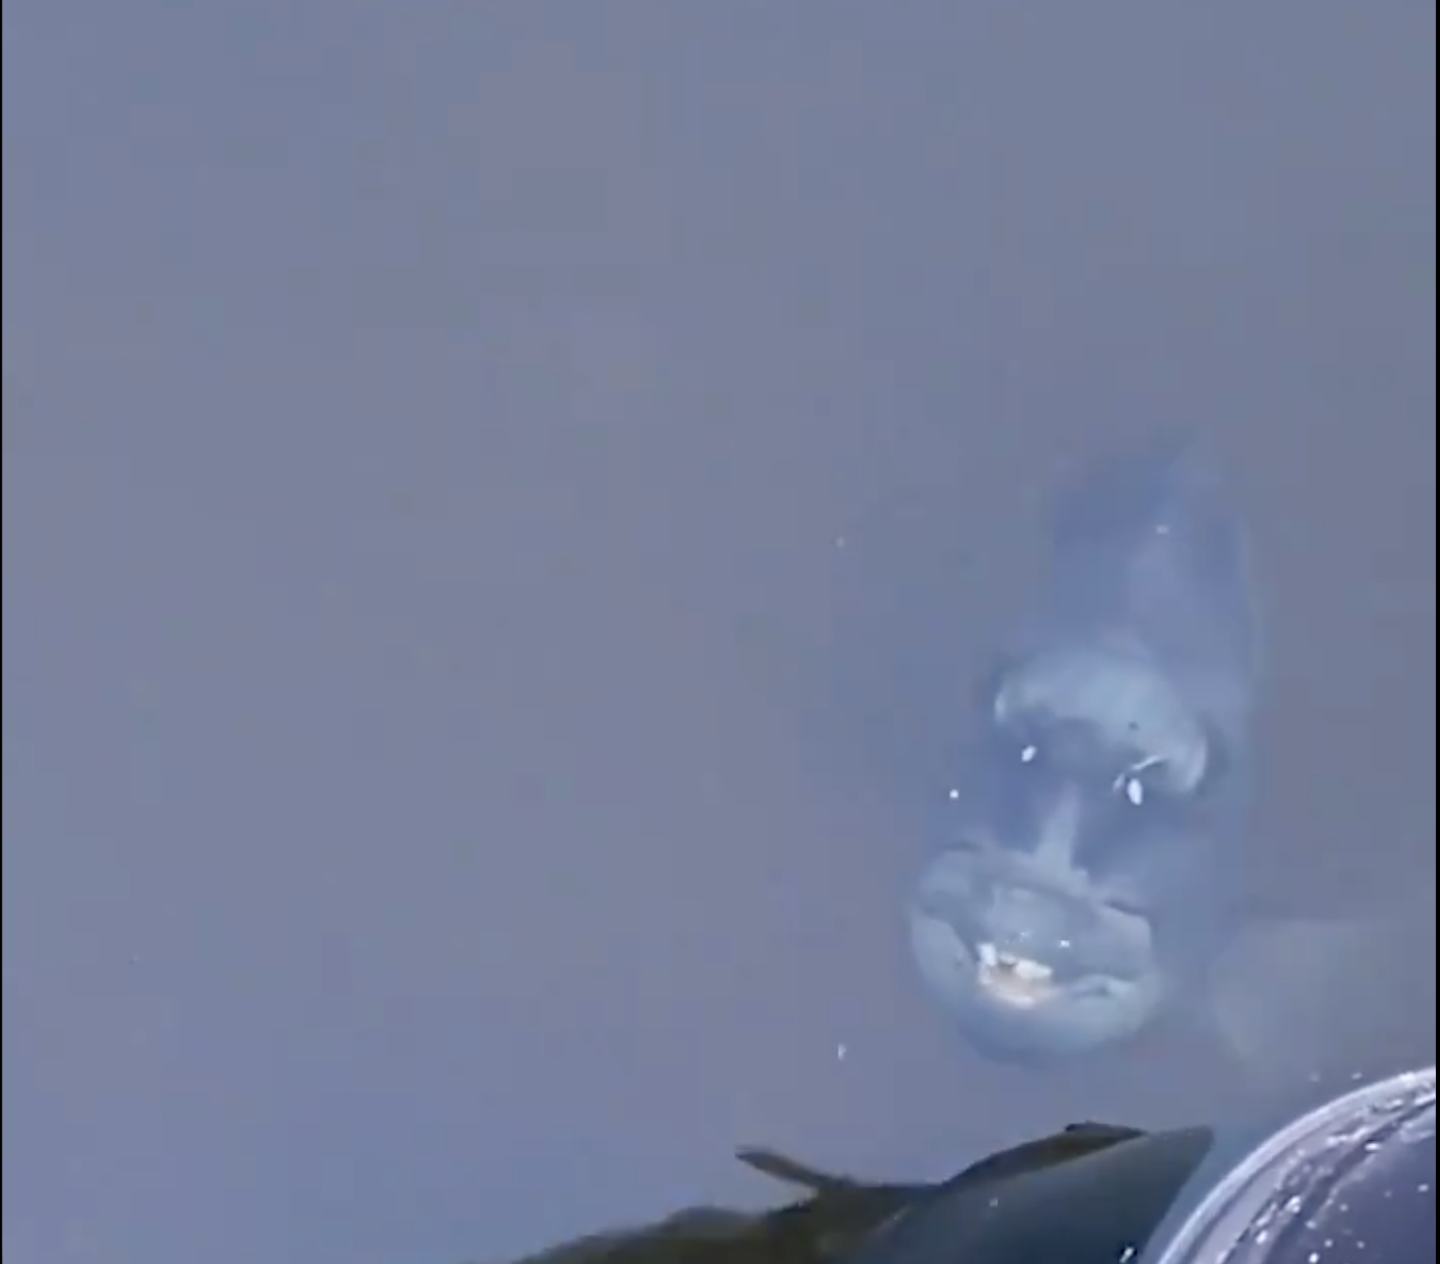 Video: Toothy “Demonfish” Lurks in Florida Canal